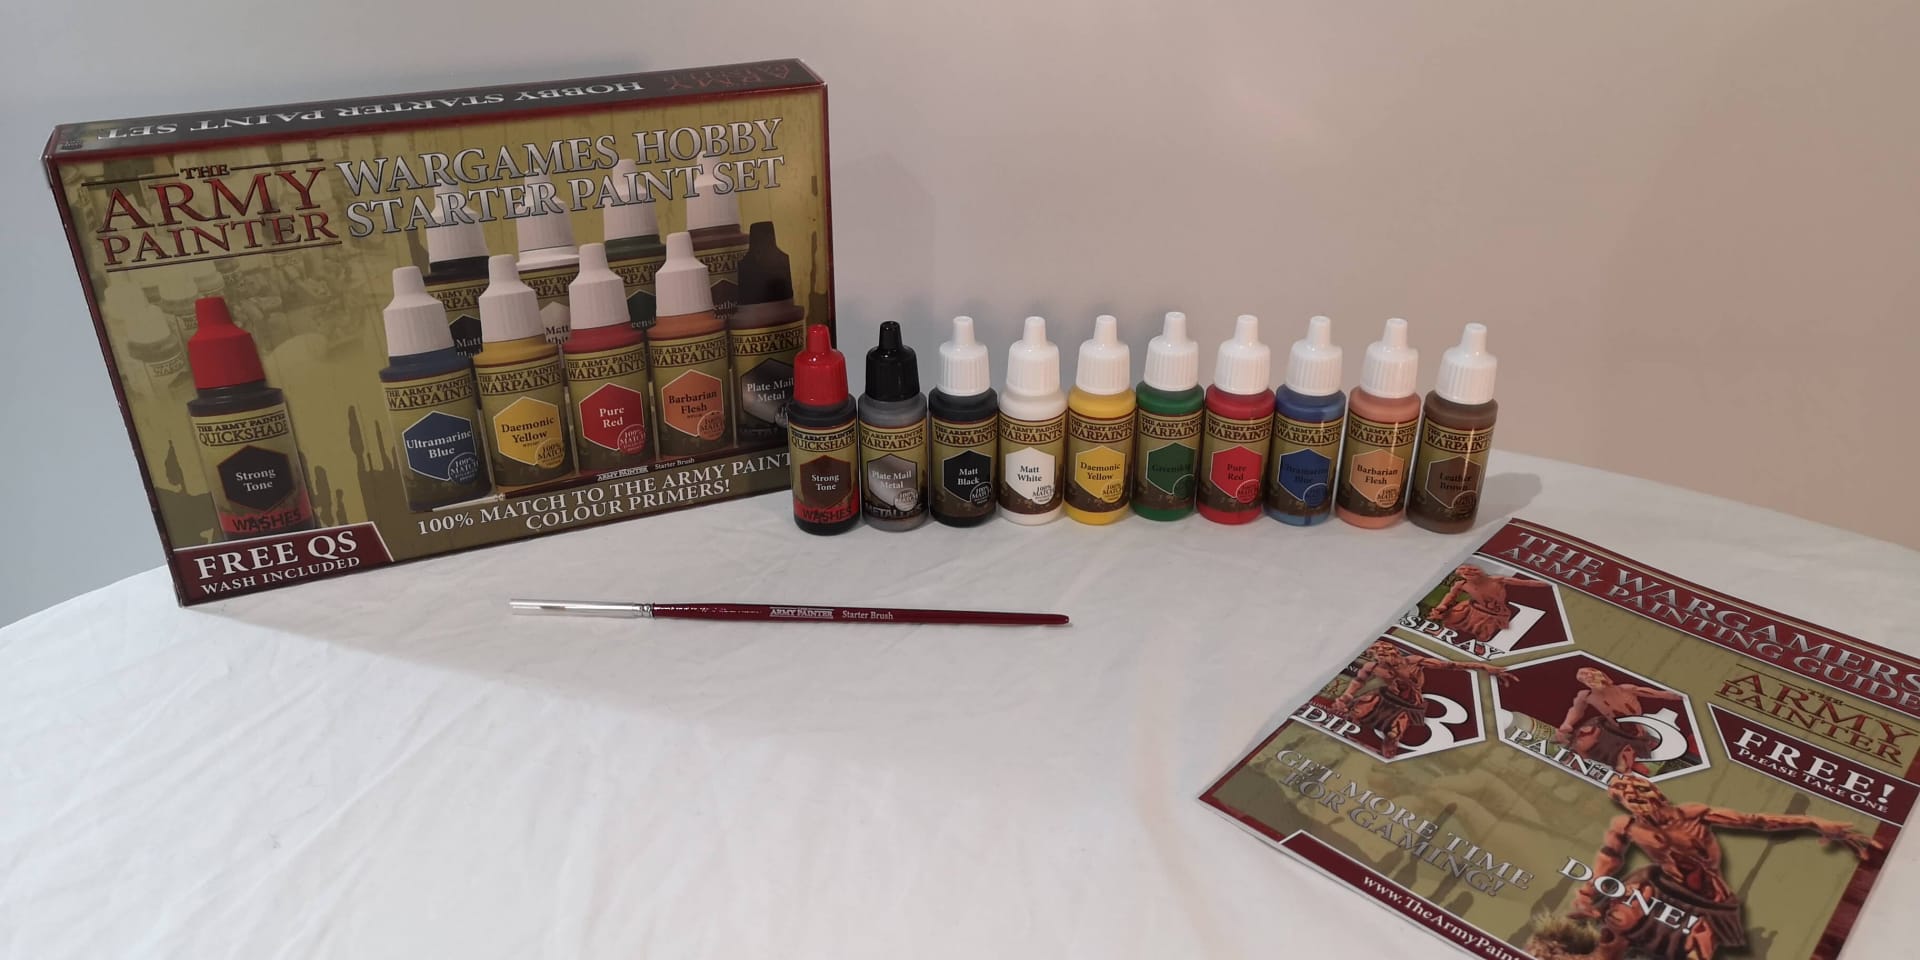 The Army Painter Hobby Starter Paint Set.